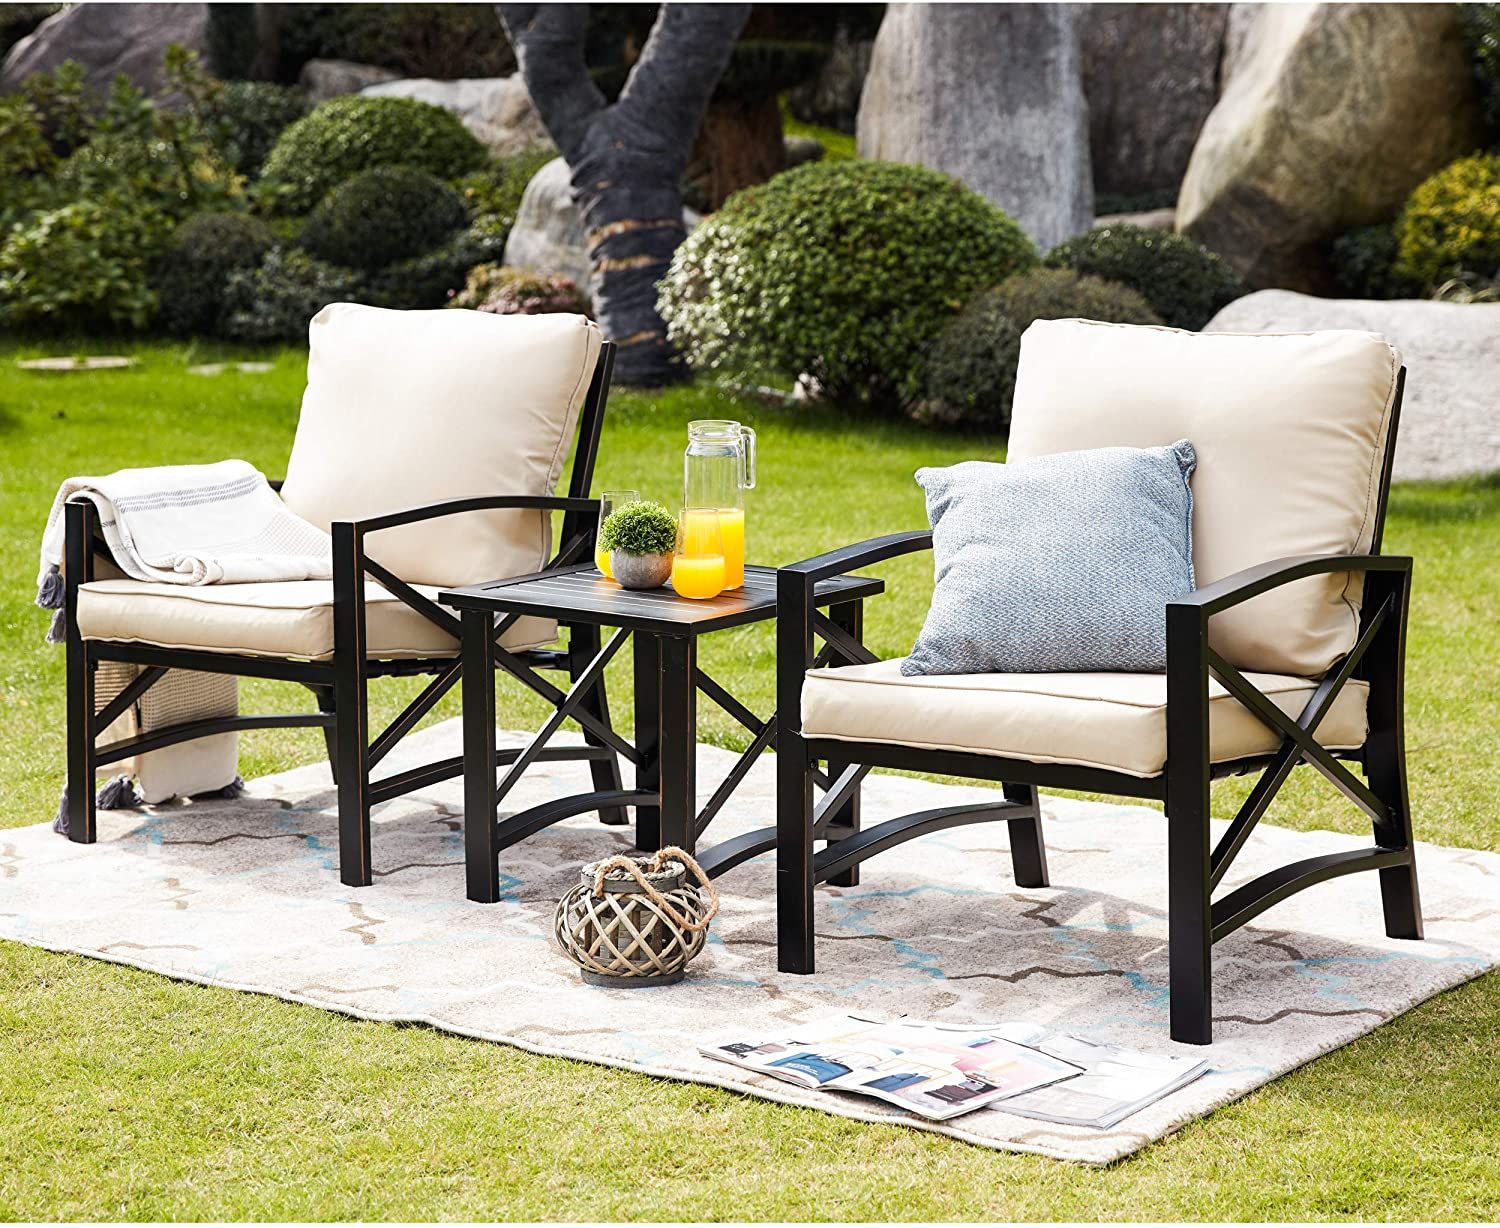 8 Best Patio Furniture Sets 2022 The, Best Patio Furniture For Large Person